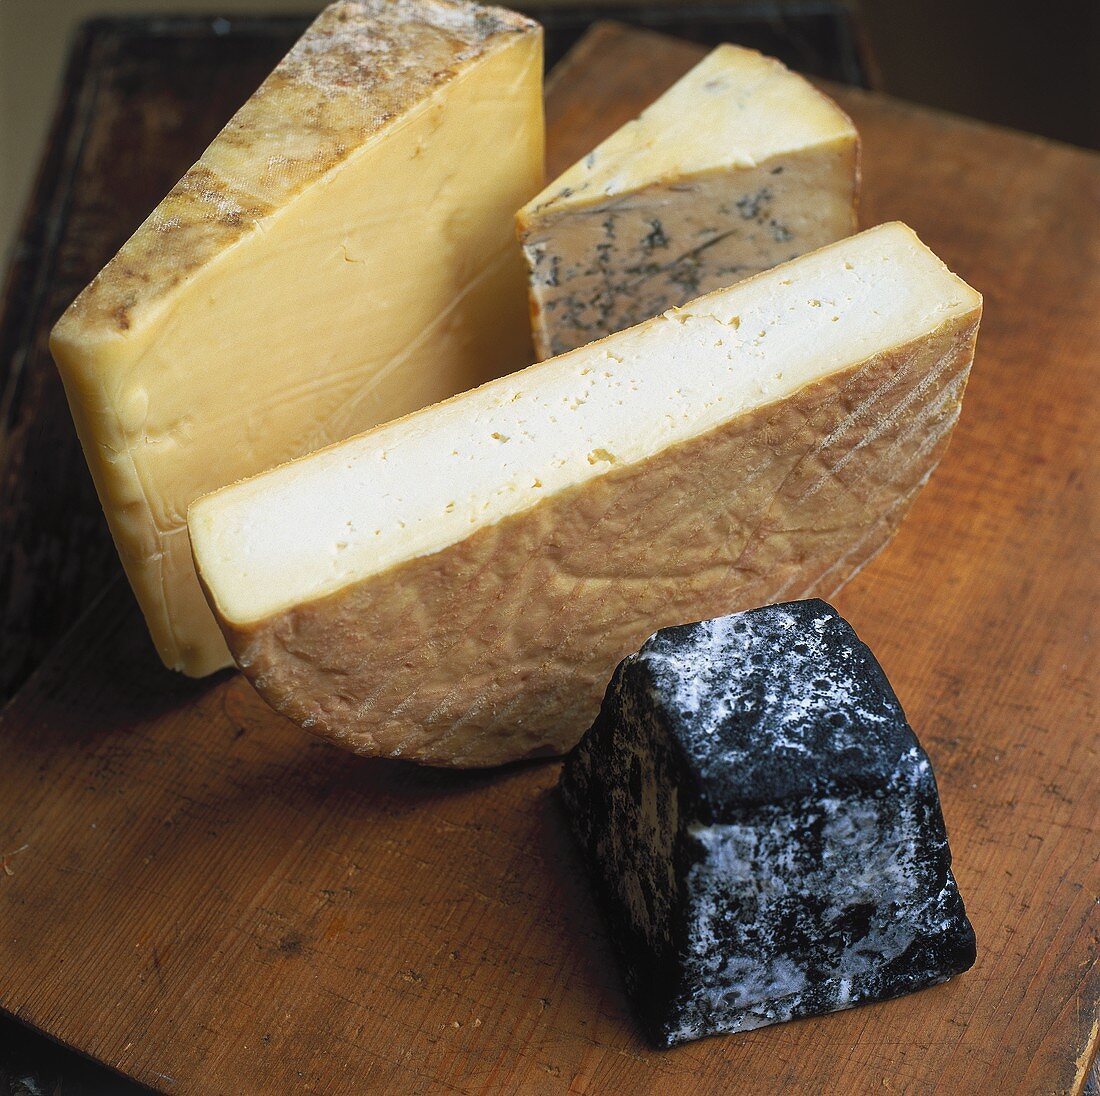 Four different types of cheese